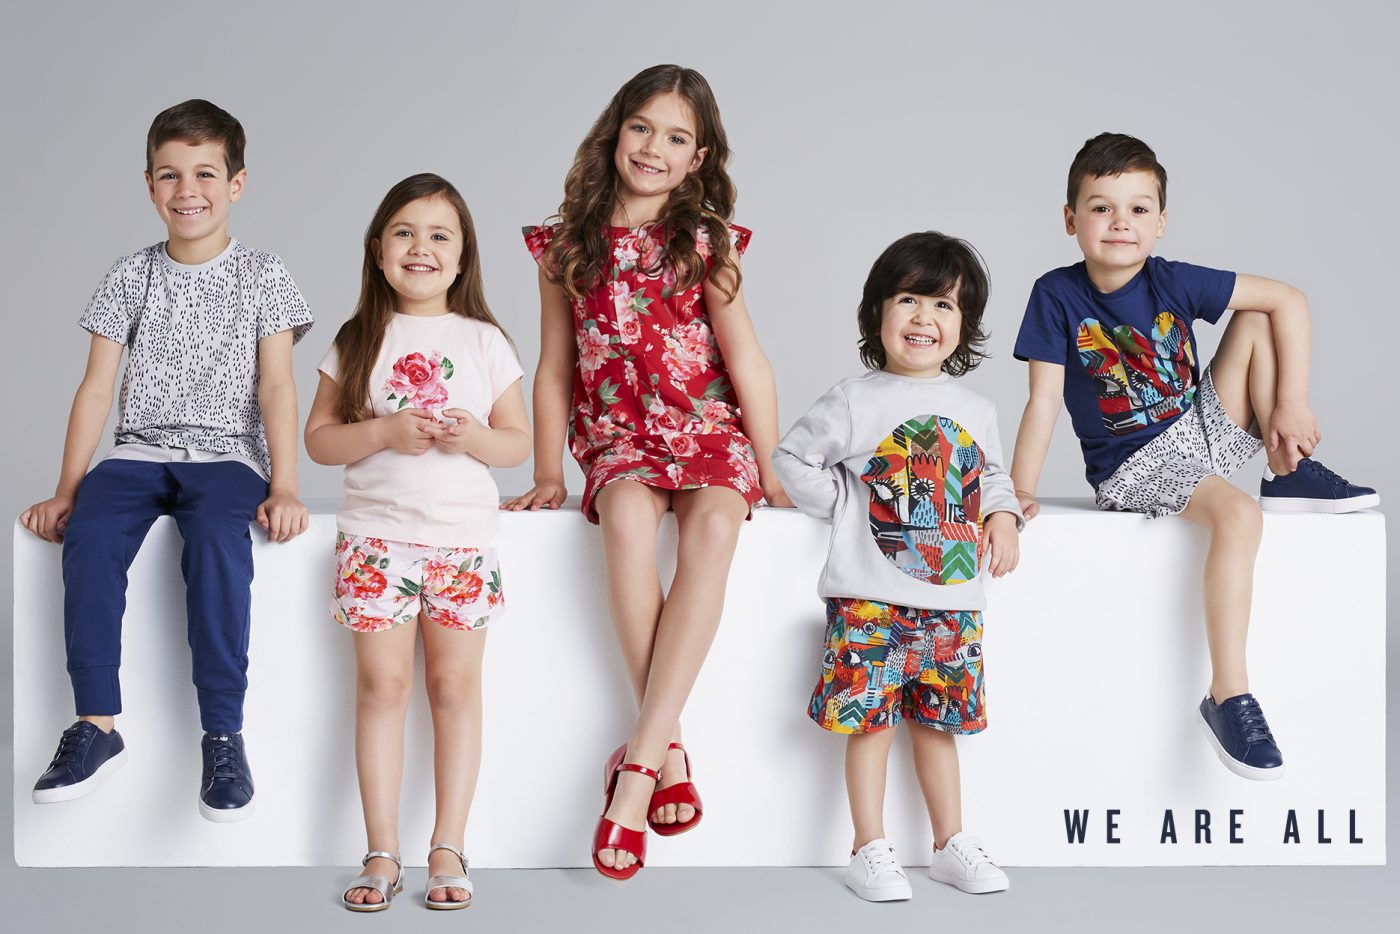 Q&A: WE ARE ALL, TAKING CHILDRENSWEAR TO A NEW LEVEL - Couturing.com